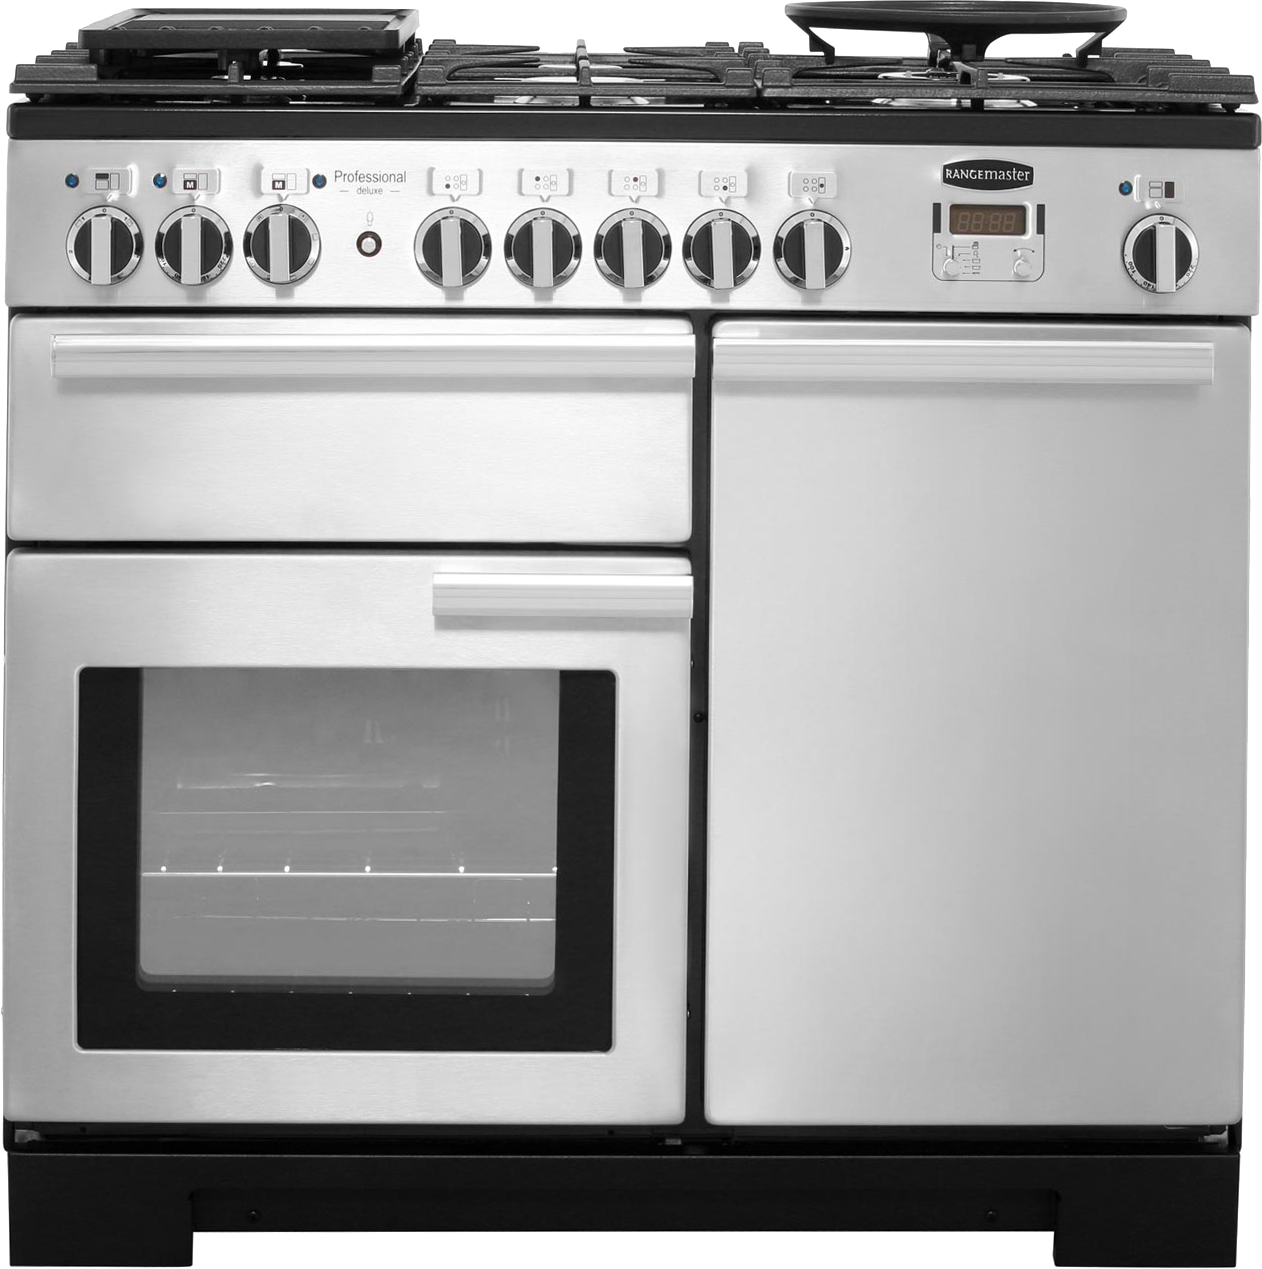 Rangemaster Professional Deluxe PDL100DFFSS/C 100cm Dual Fuel Range Cooker - Stainless Steel - A/A Rated, Stainless Steel